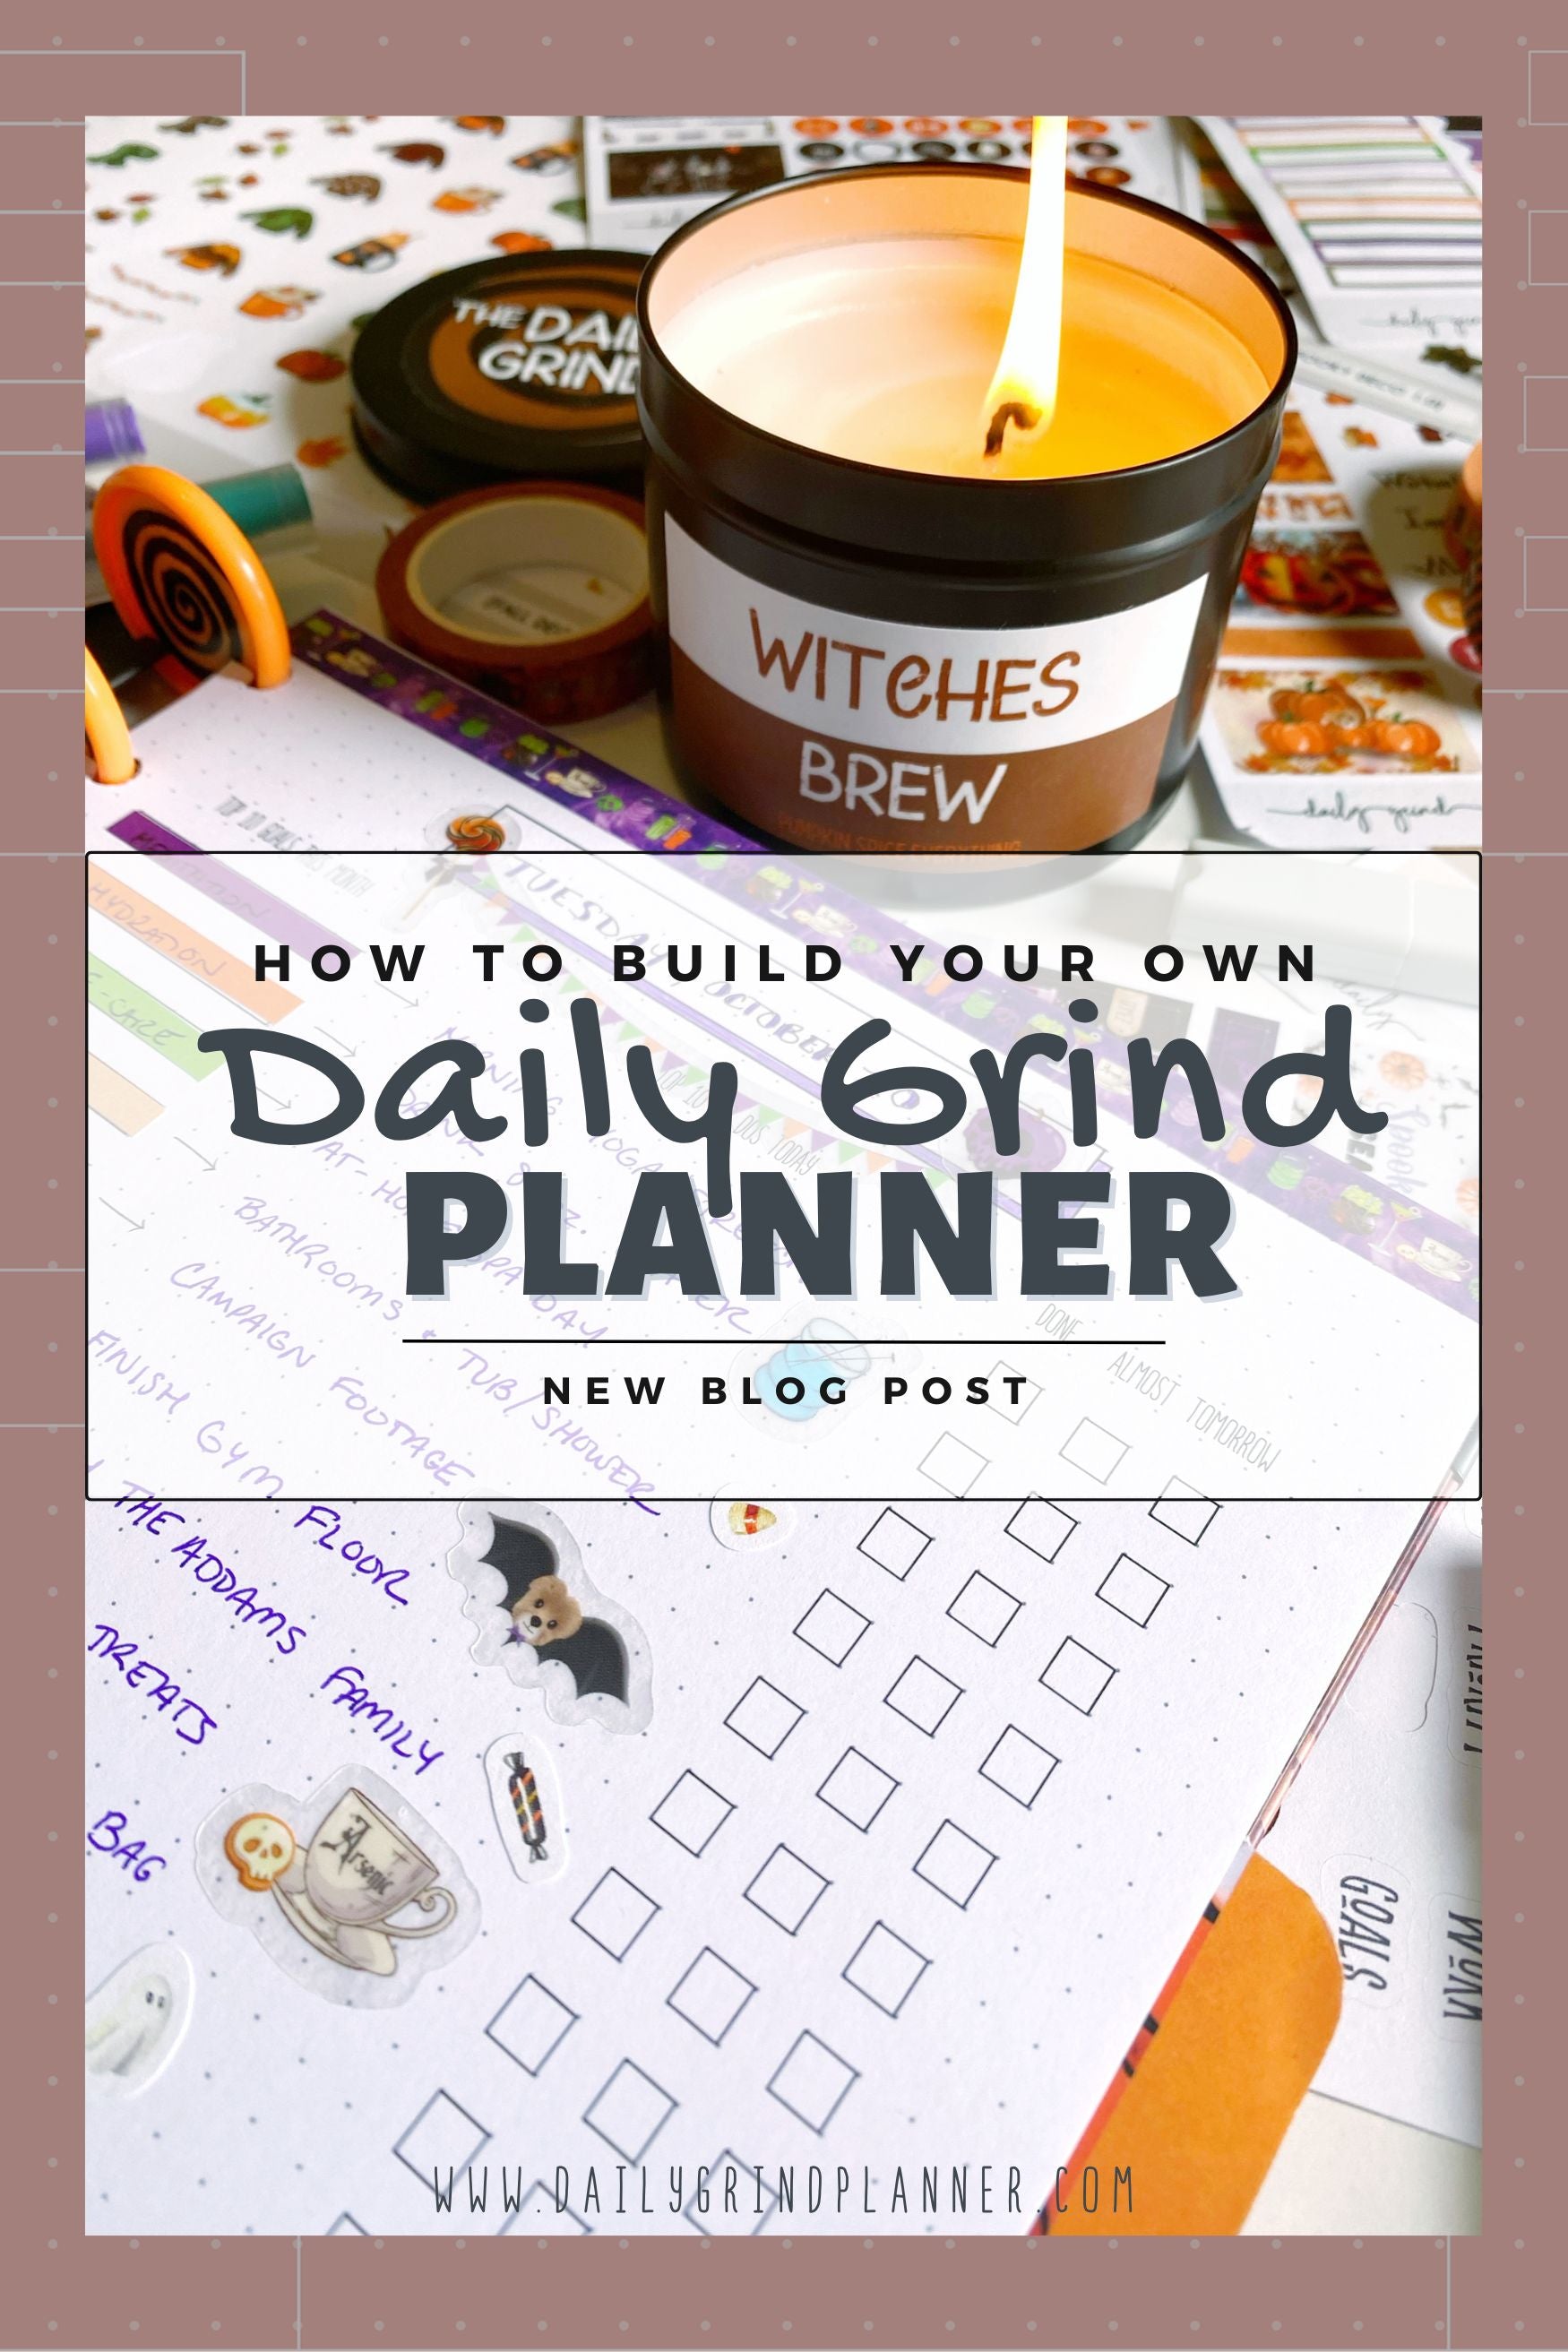 HOW TO BUILD YOUR OWN DAILY GRIND PLANNER